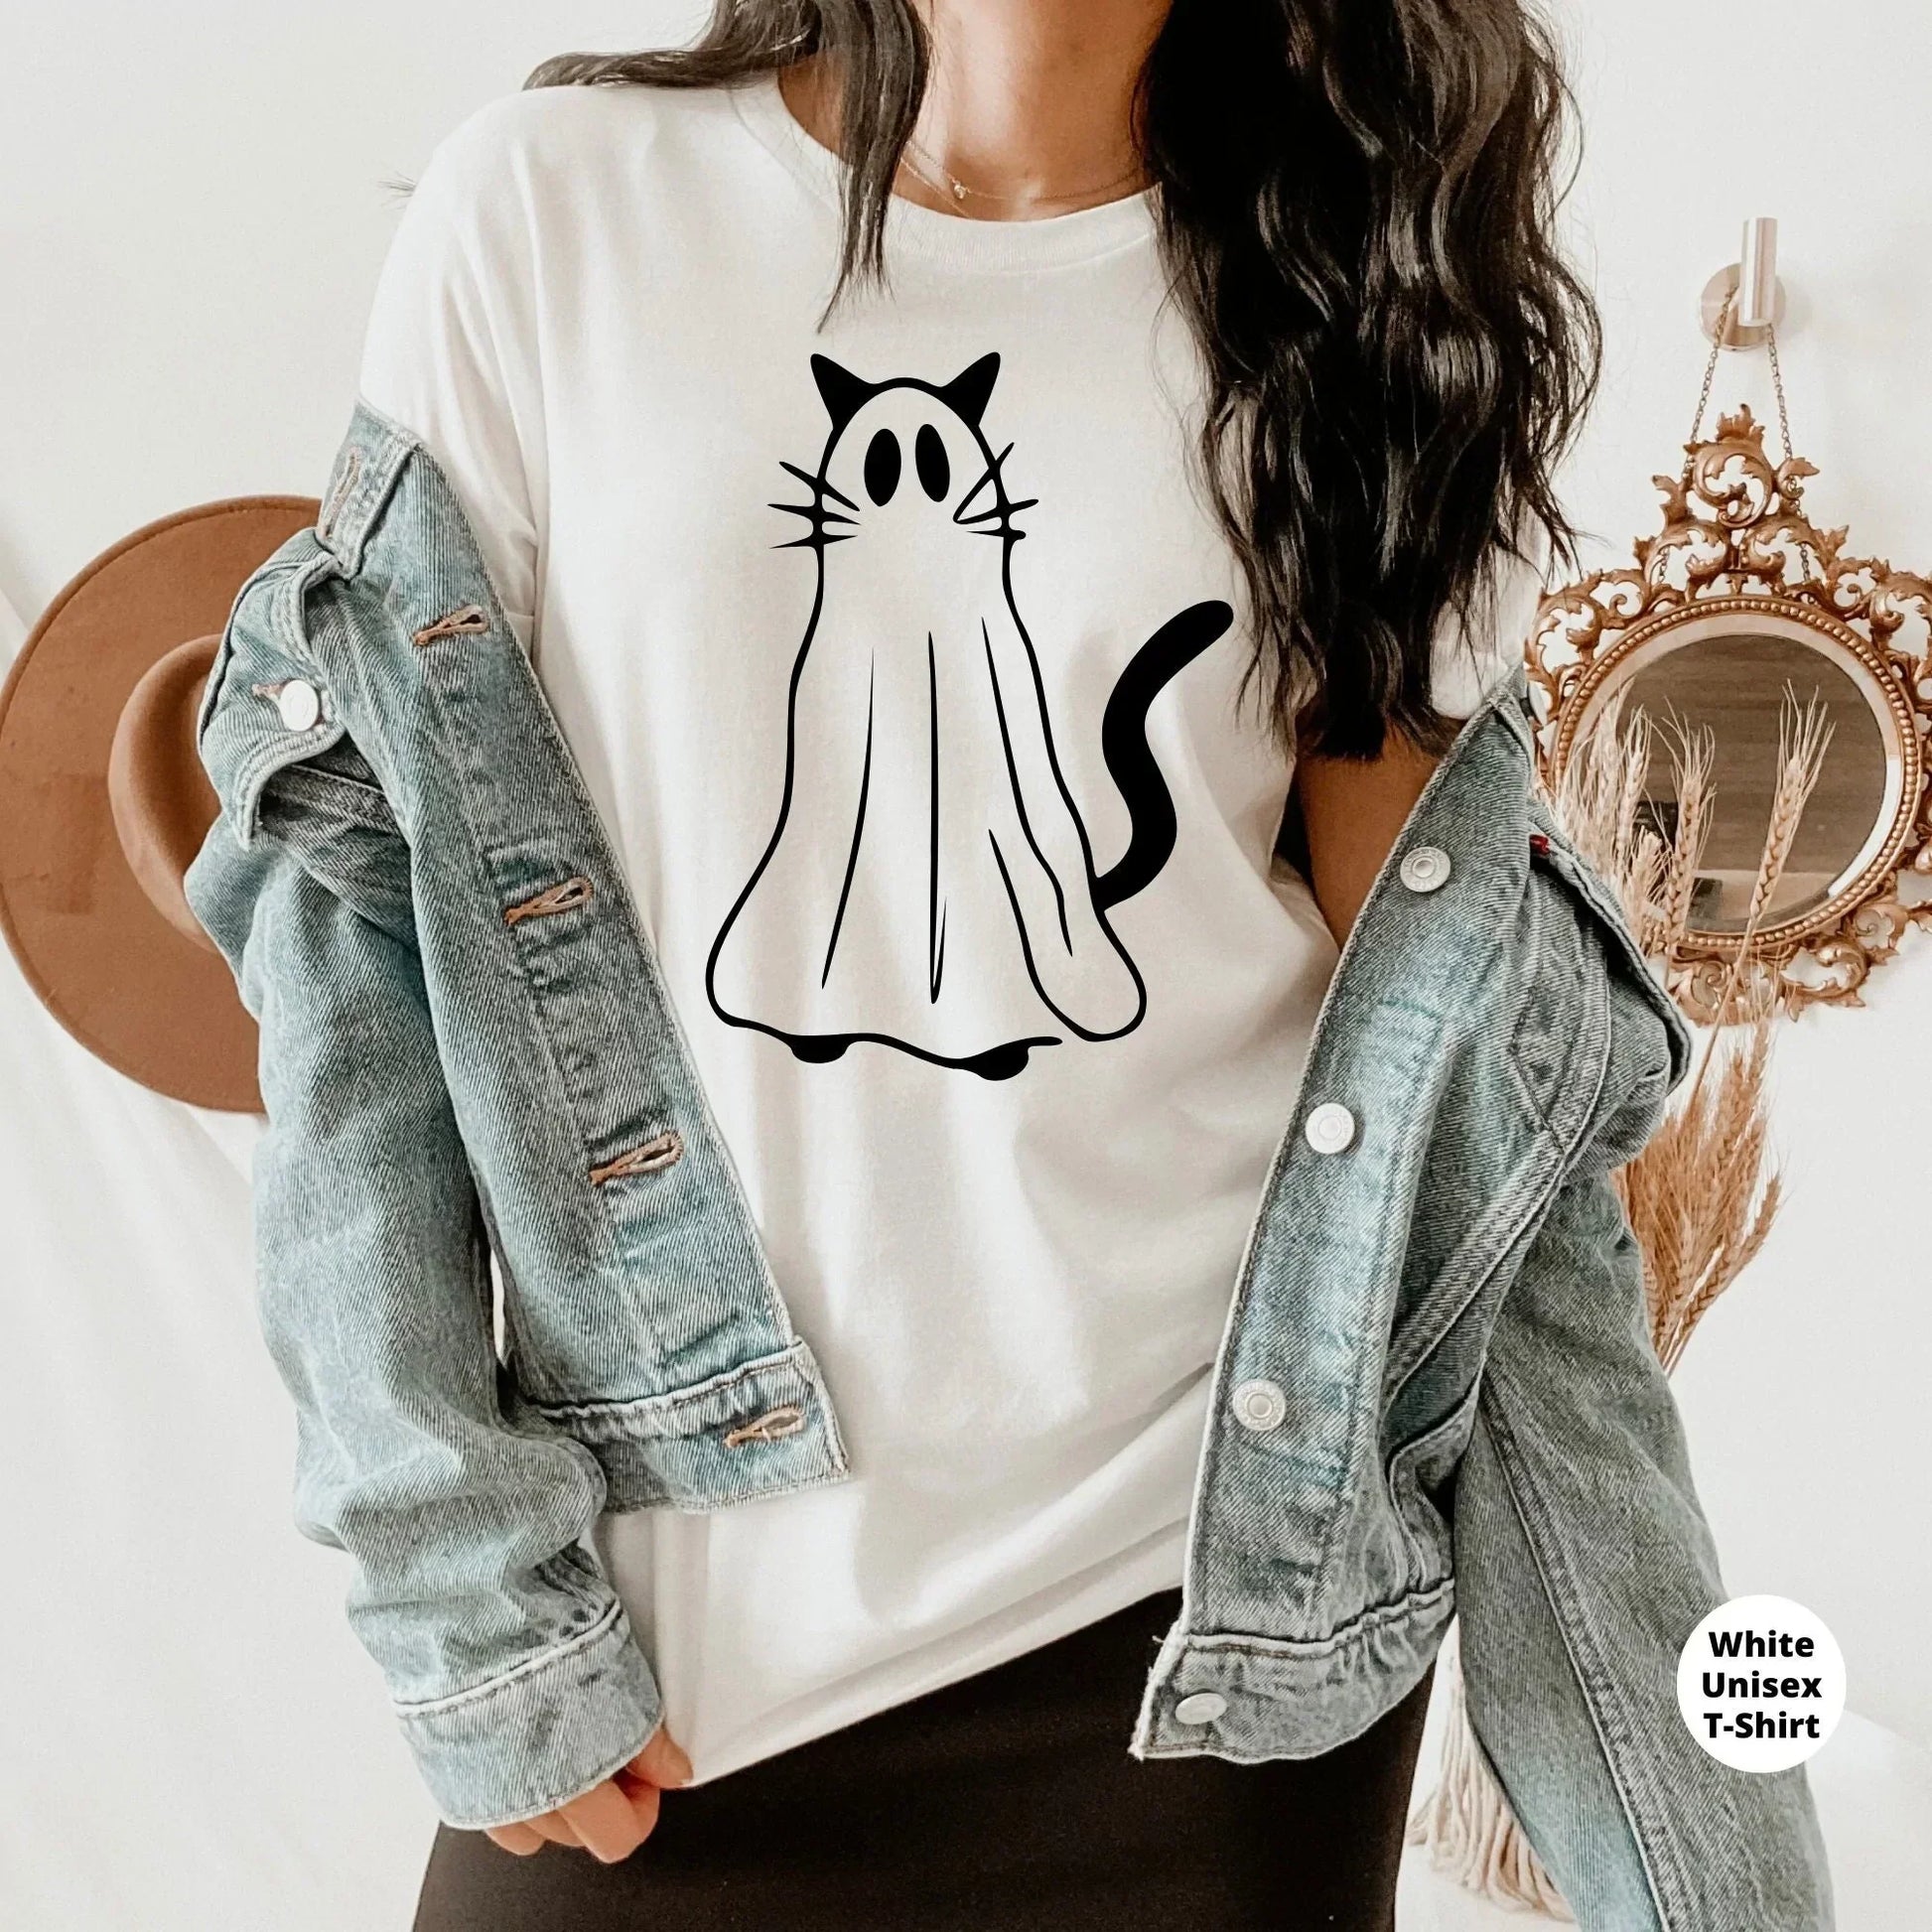 Halloween Sweater, Cat Ghost Shirt, Fall Sweatshirt, Gothic clothing, Funny Witch Party Tees, Cat lover Gift, Women's Spooky Season T-shirt HMDesignStudioUS